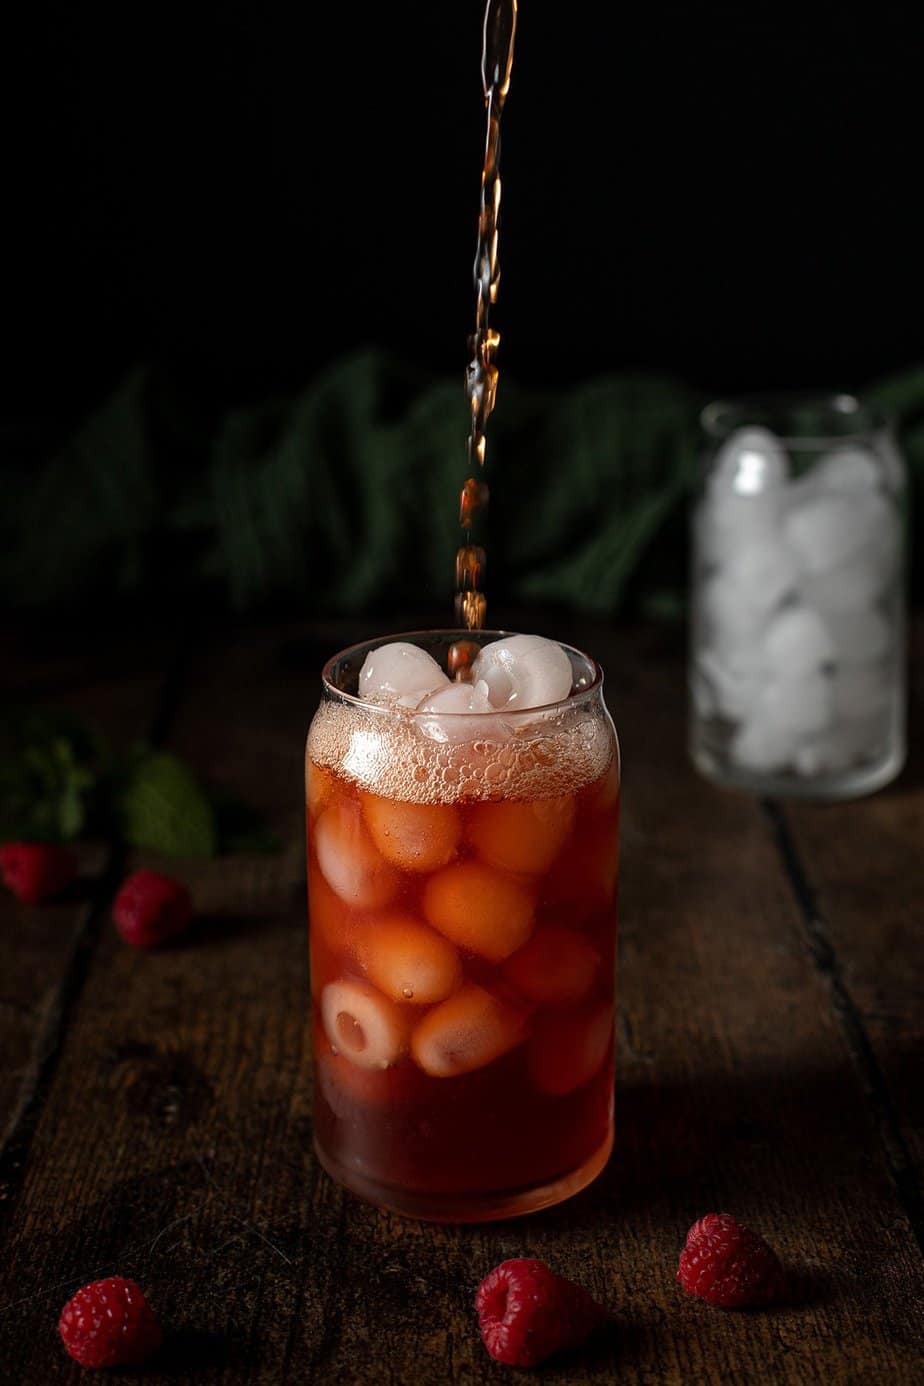 raspberry iced tea being poured into a glass